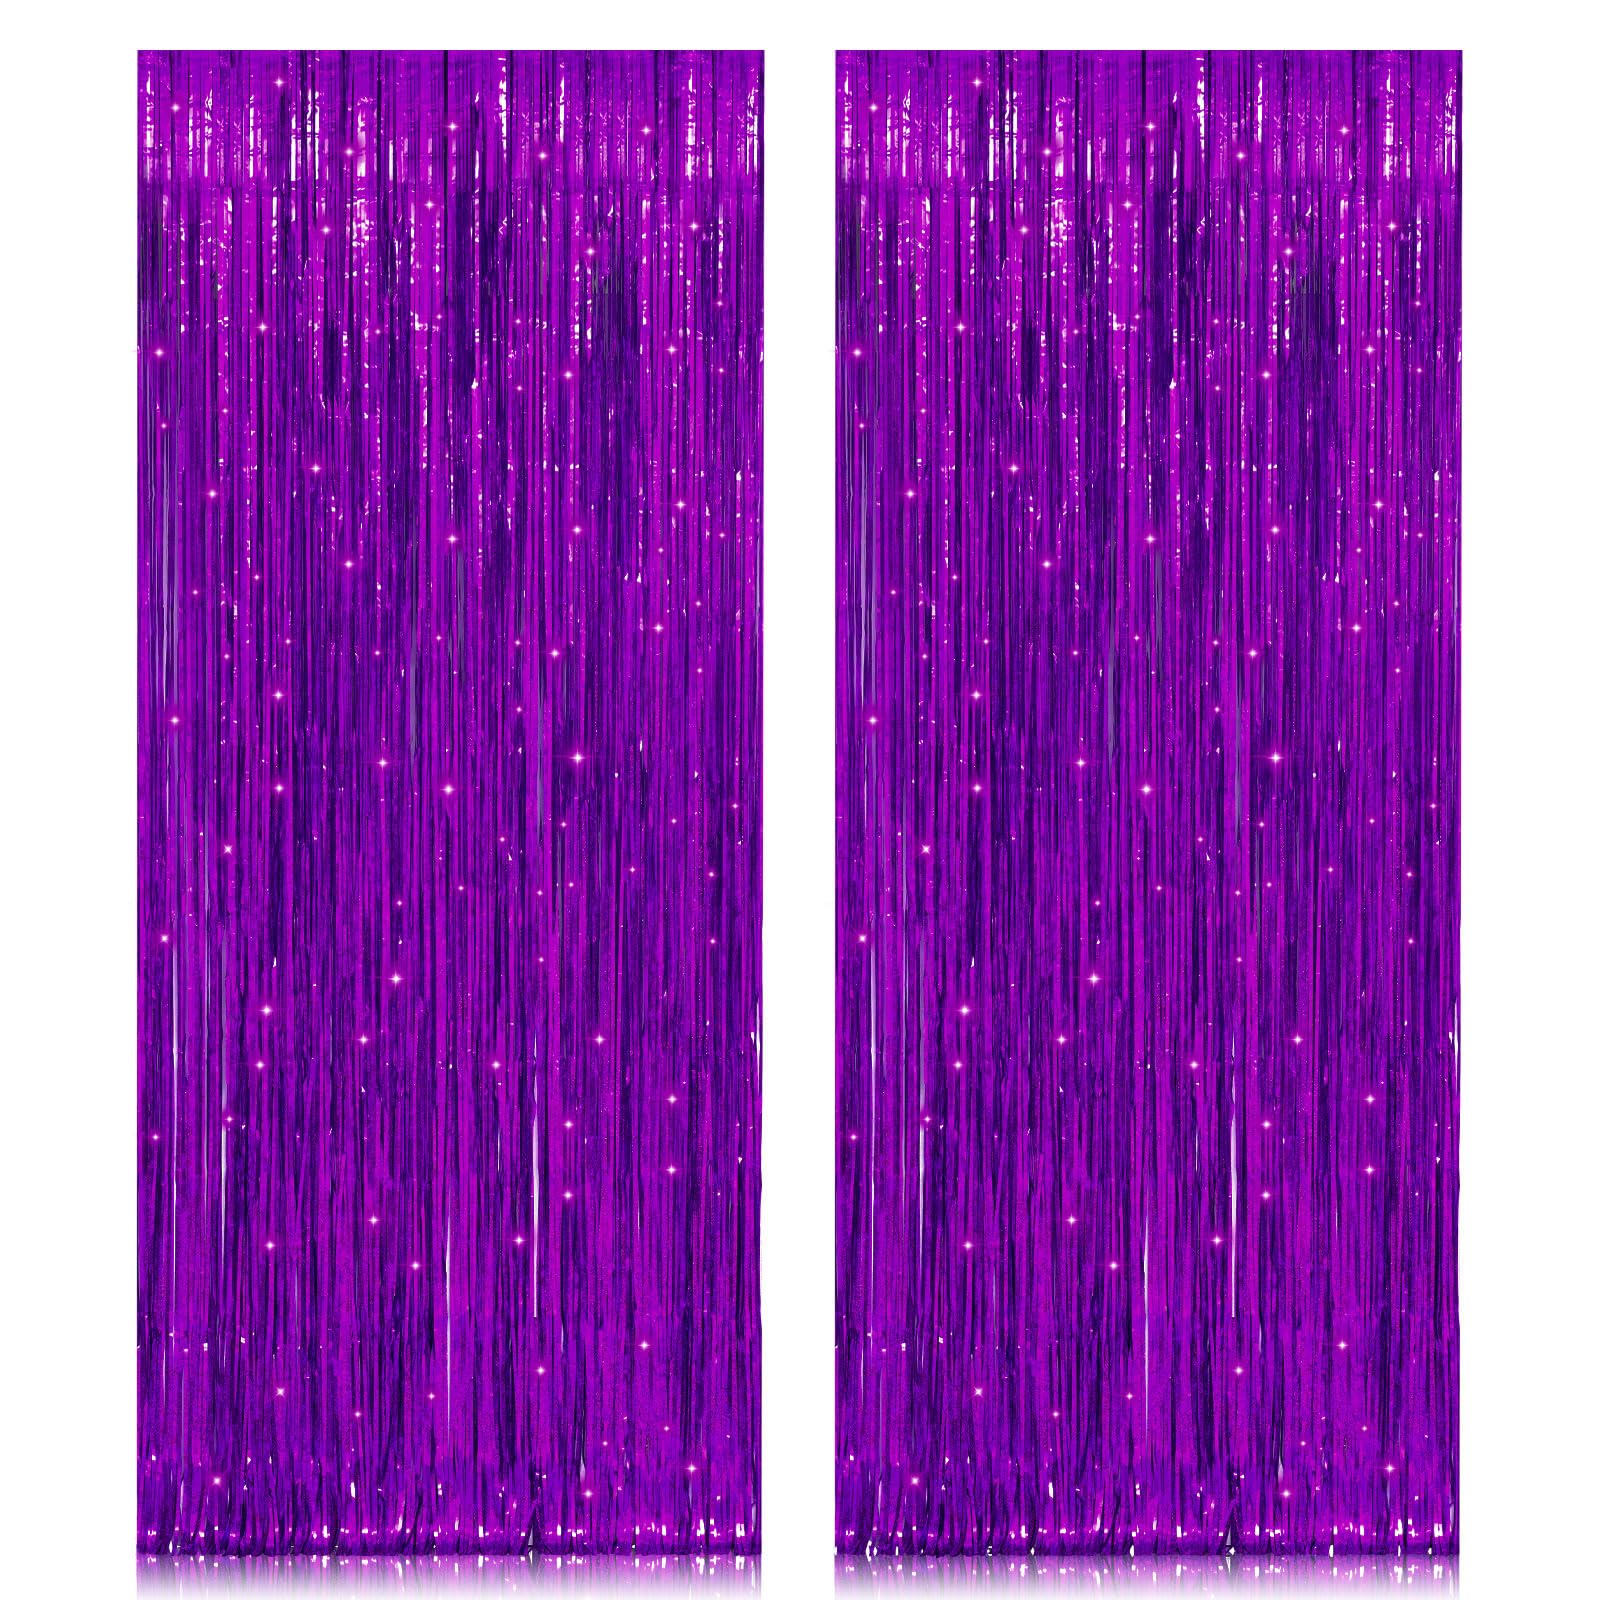 2 Pack 3.2ft x 8.2ft Purple Metallic Tinsel Foil Fringe Curtains, Large Photo Booth Backdrop Streamer Curtain for Party Door Wall Curtains Wedding Bachelorette Birthday Christmas New Year Decorations